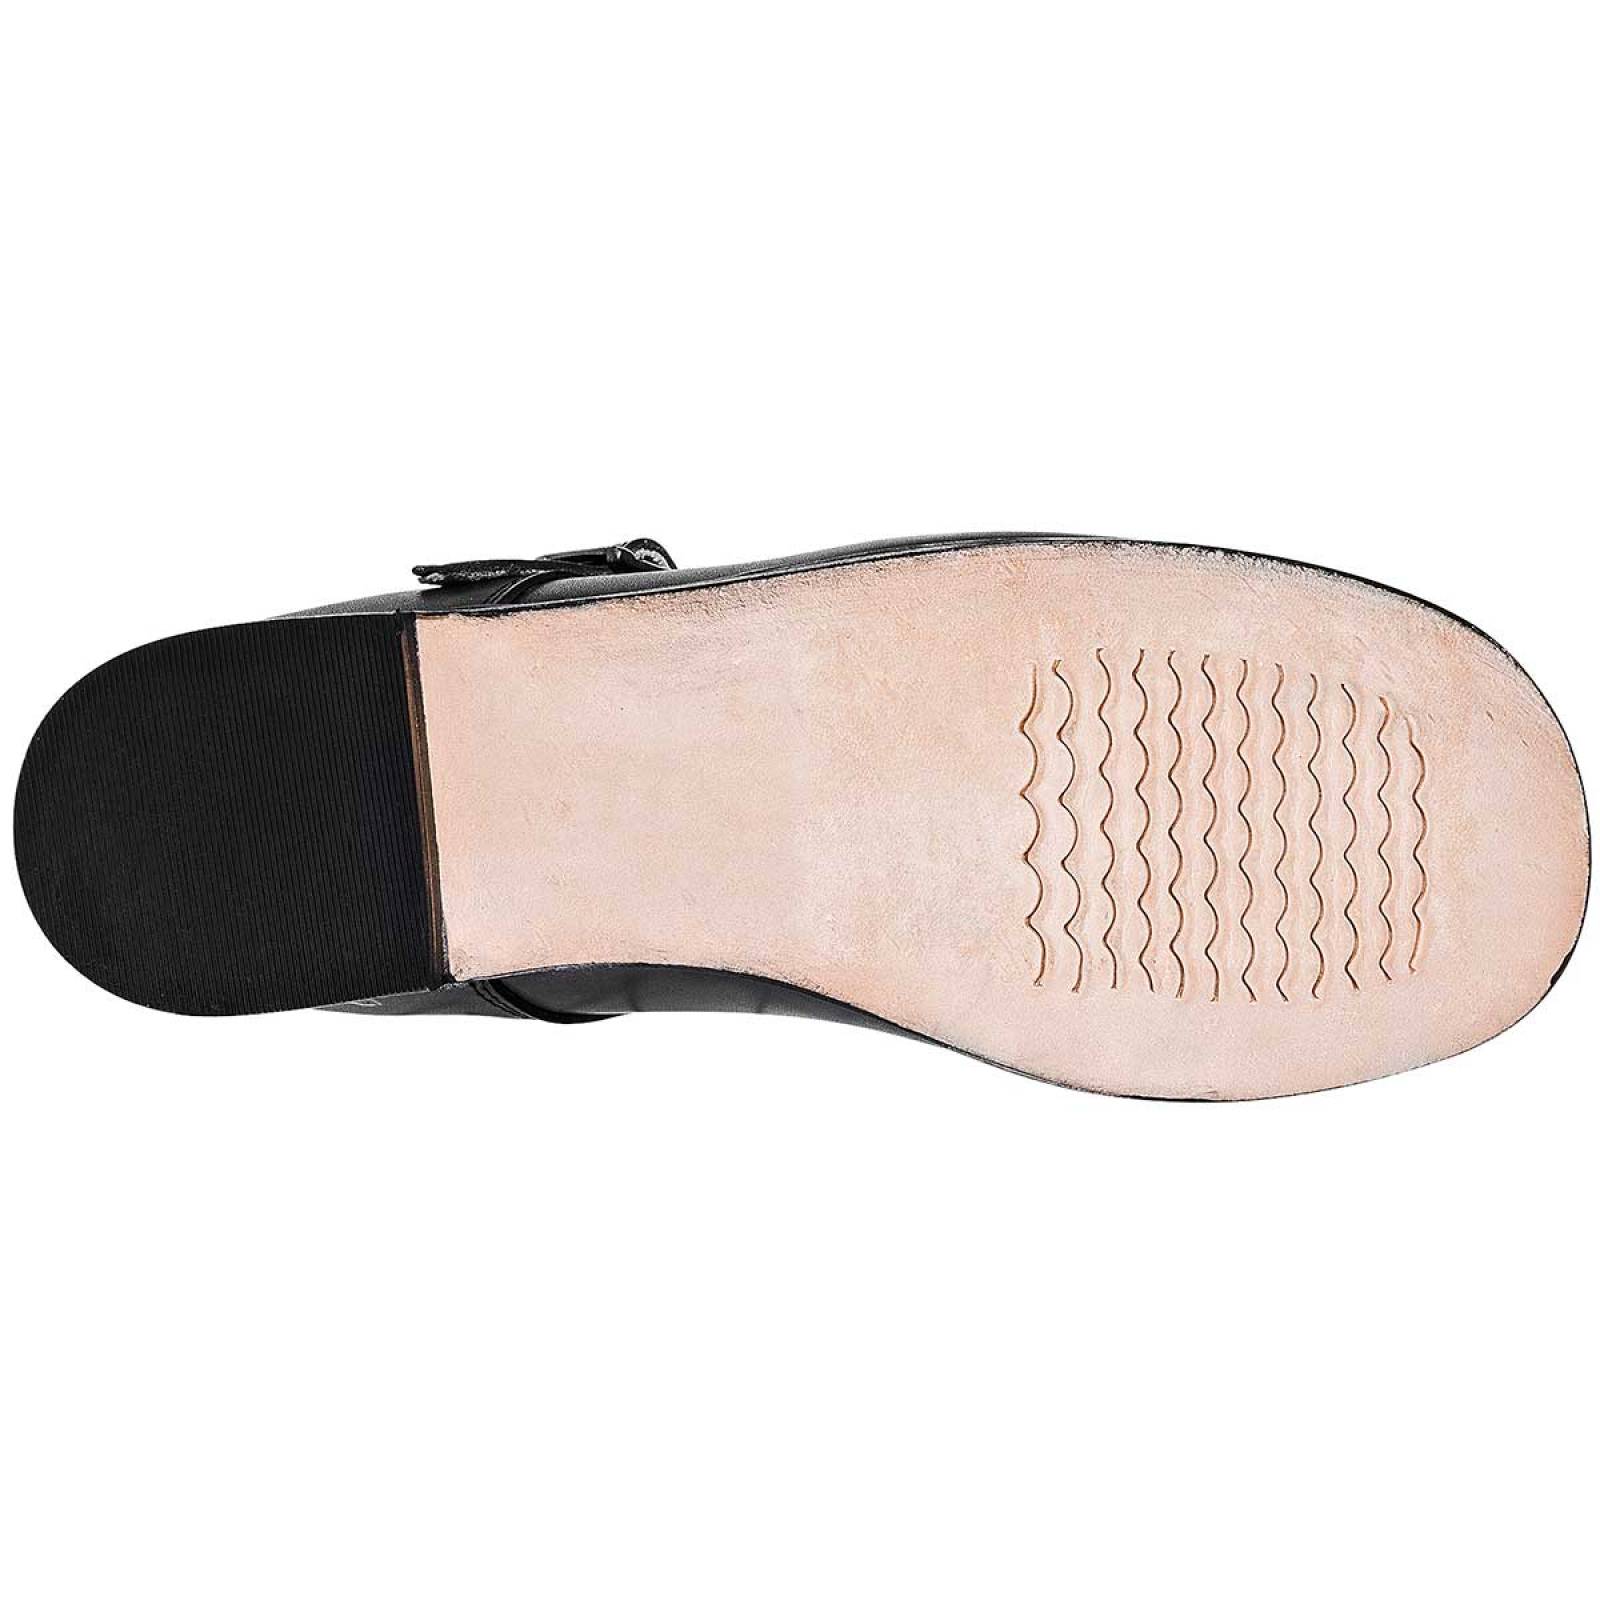 Ta-or-to Zapato Mujer Negro